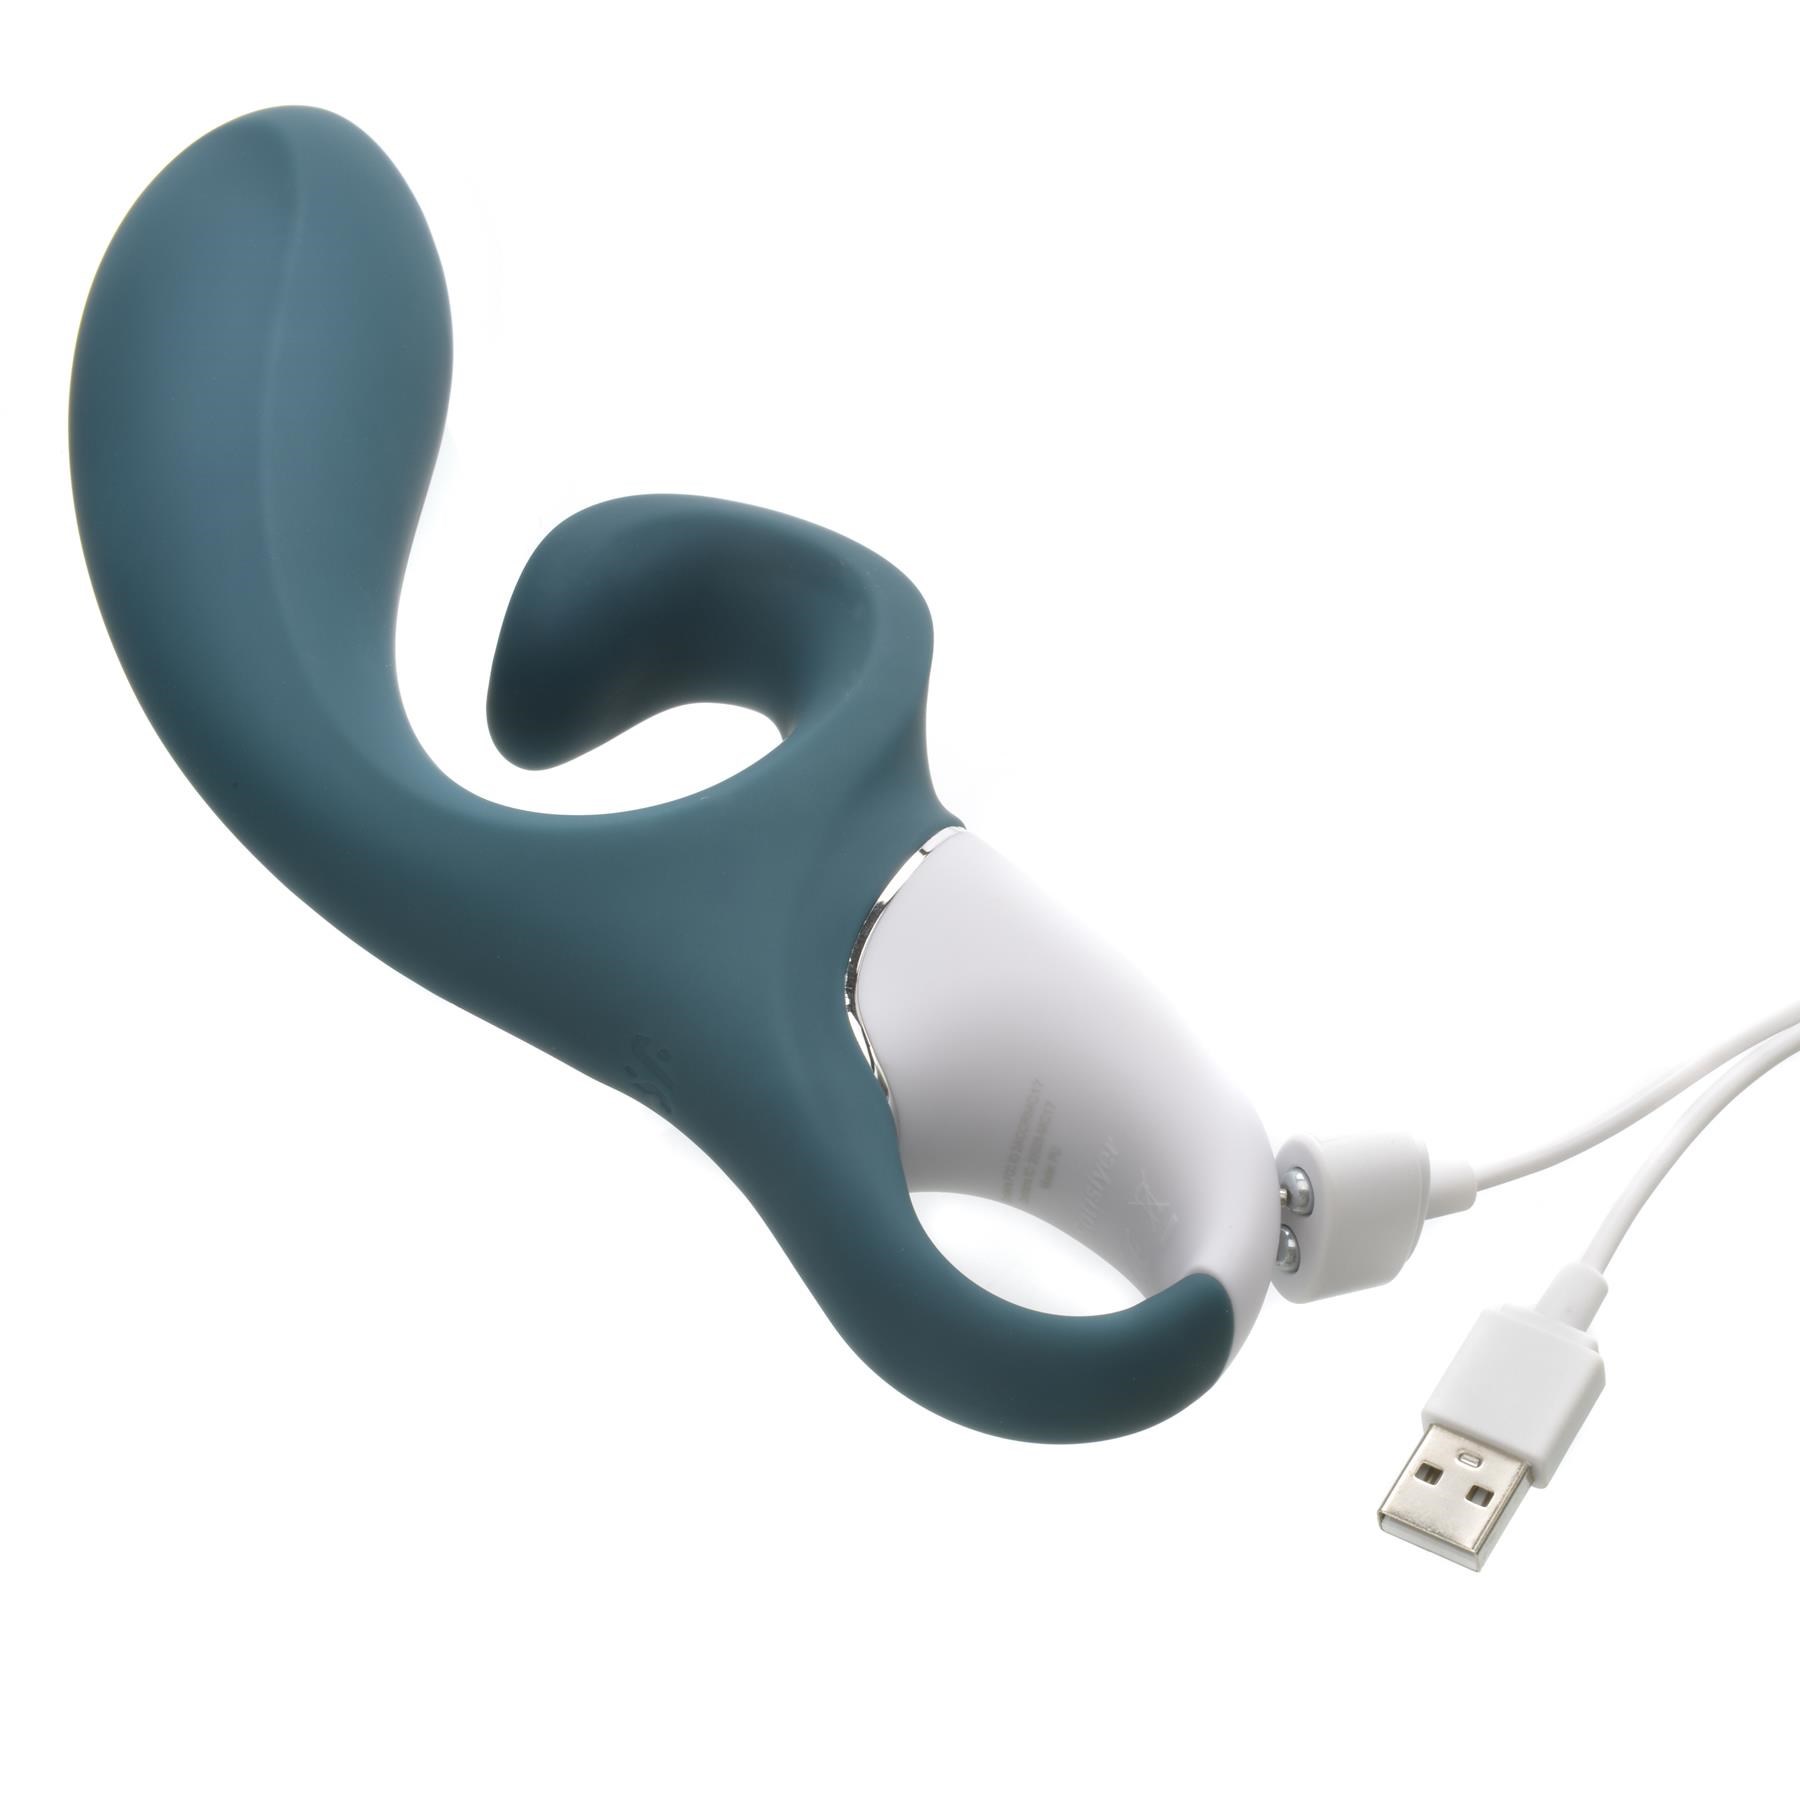 Satisfyer Hug Me Rabbit Vibrator- Showing Where Charging Cable is Placed